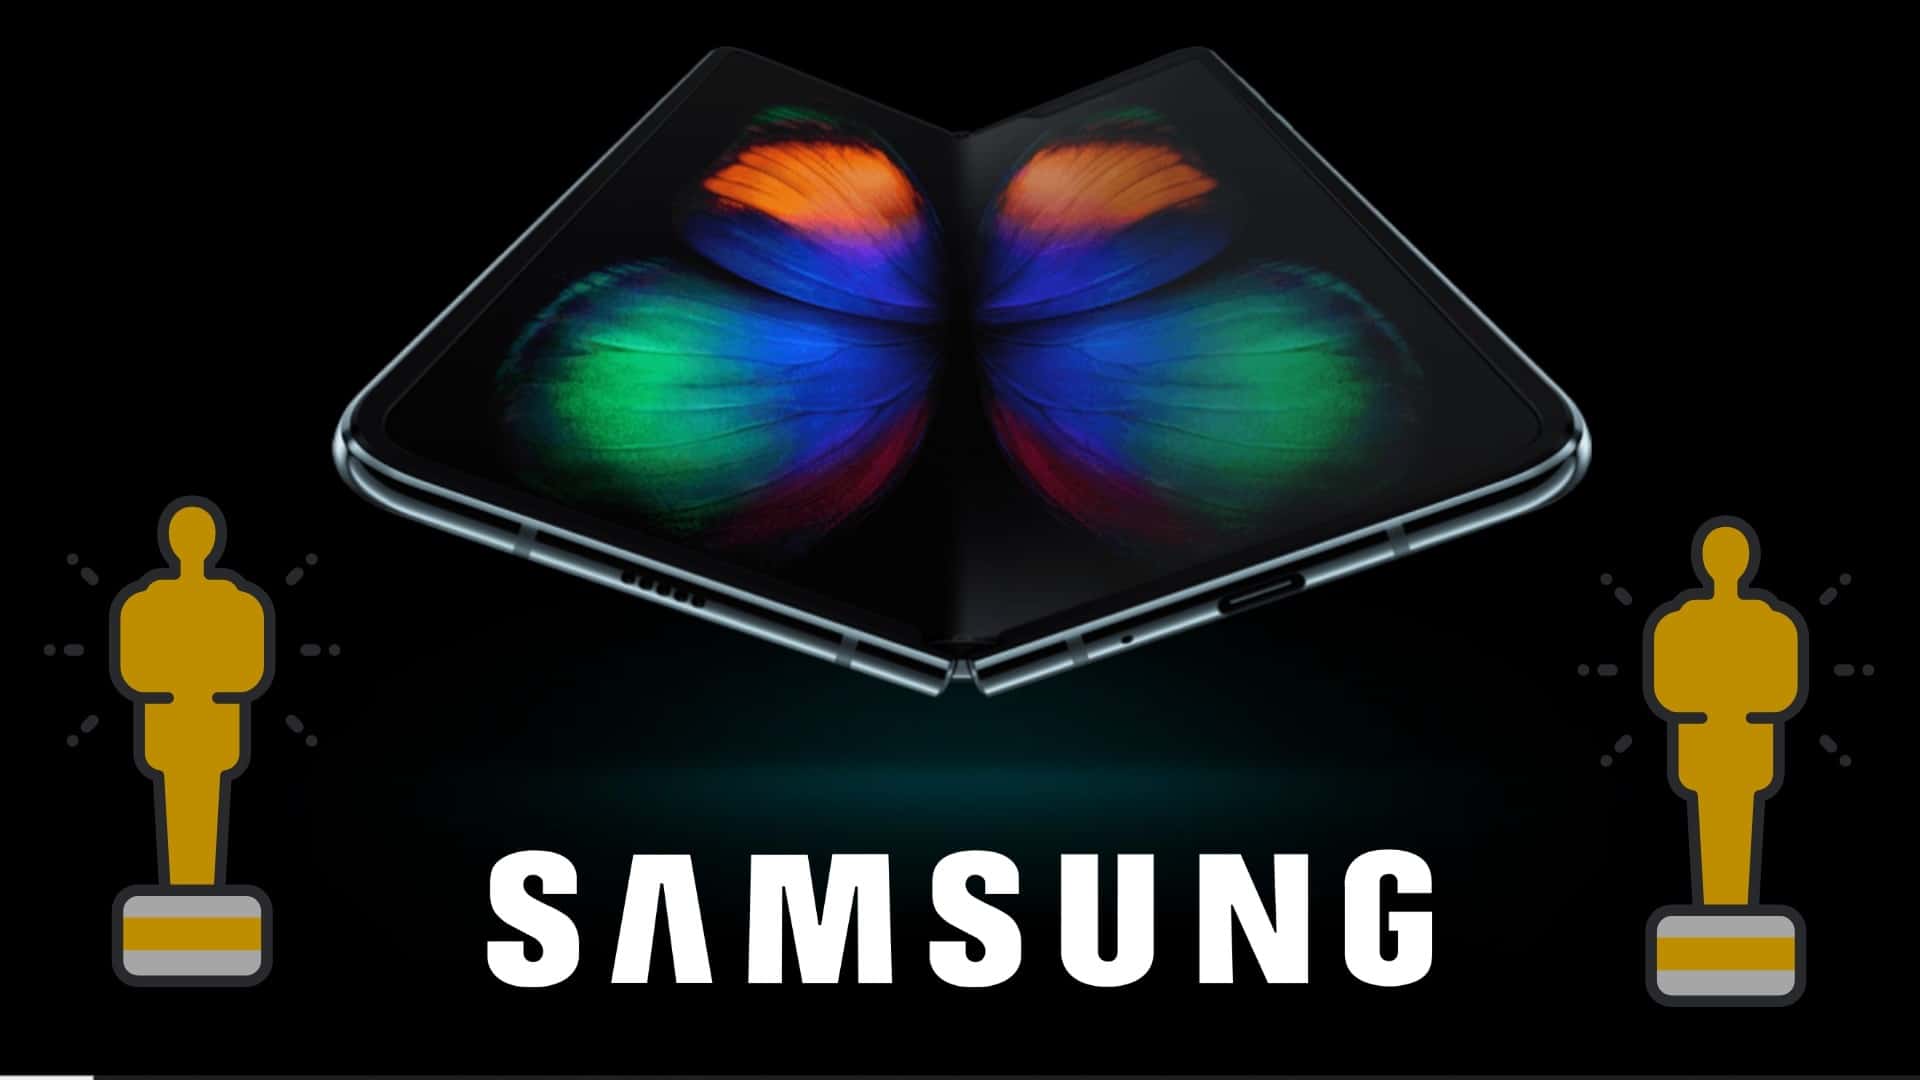 Samsung launches foldable phones